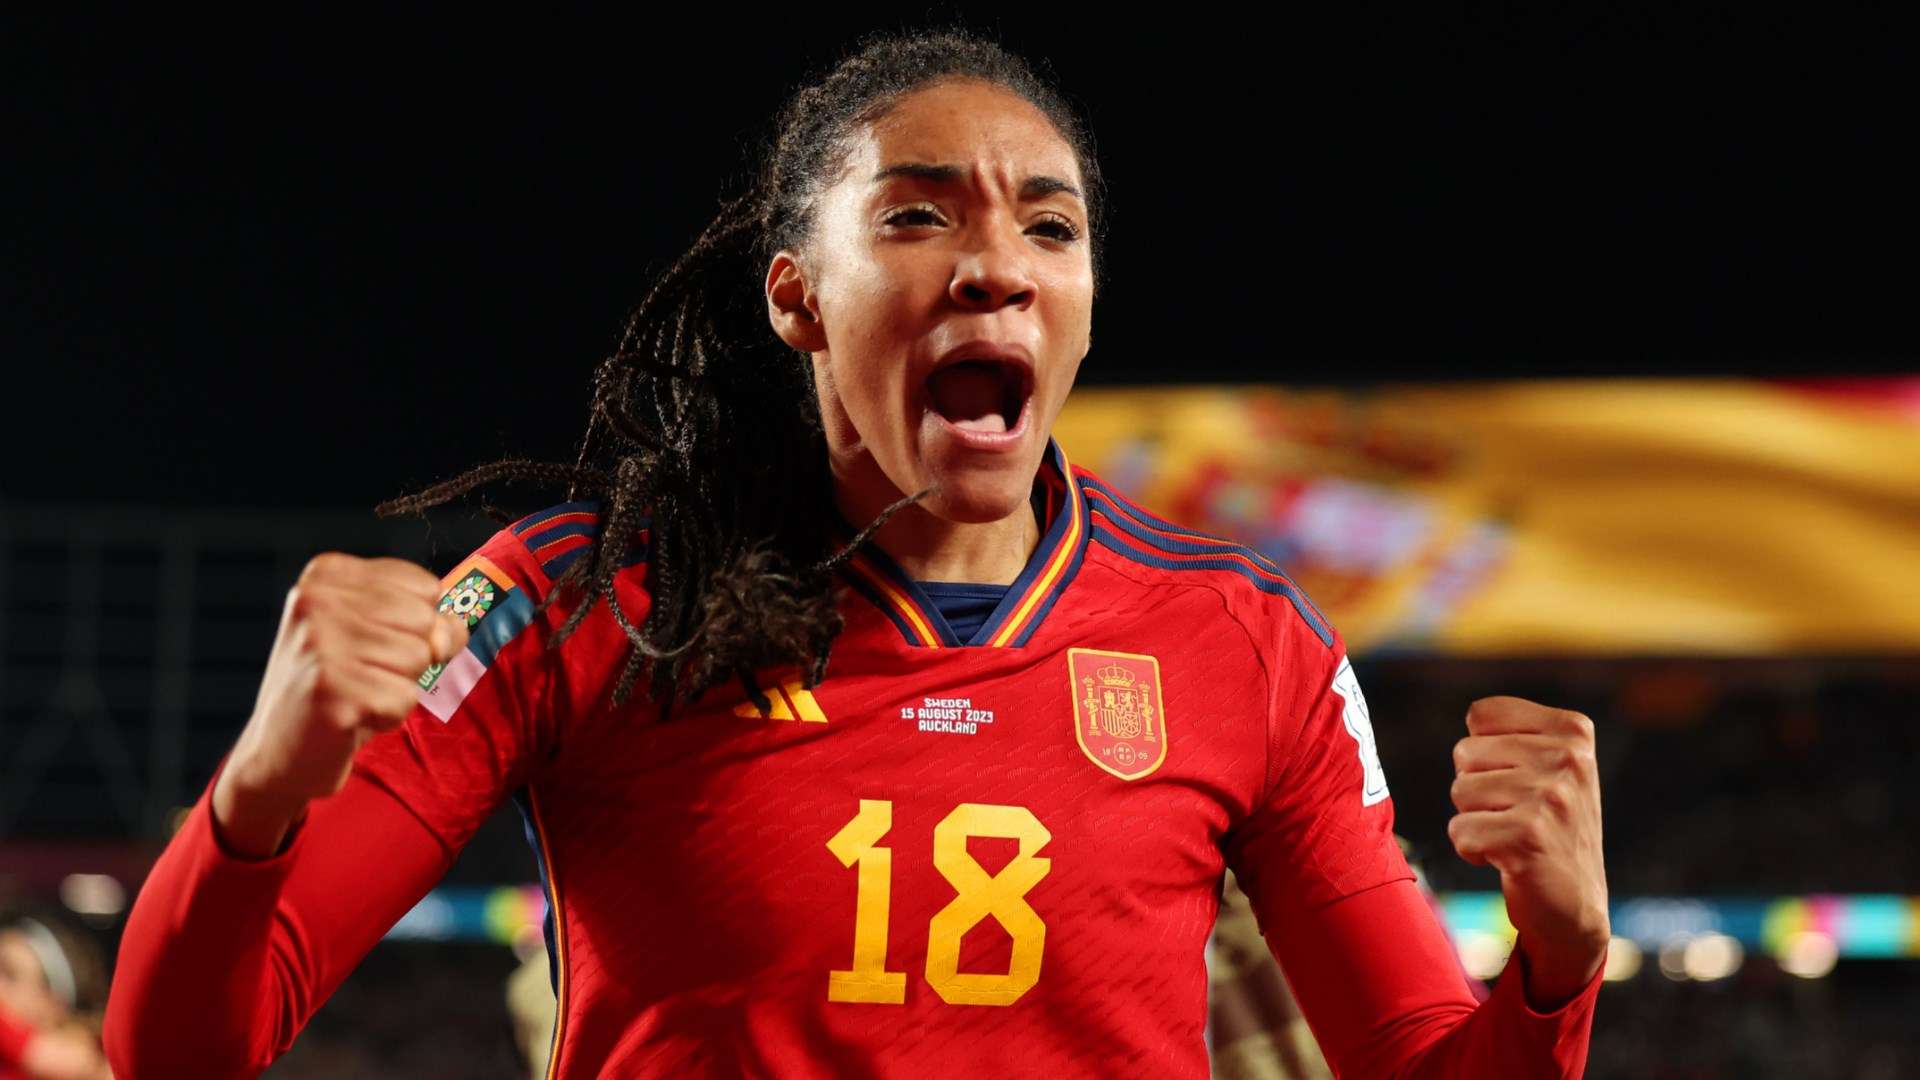 Salma Paralluelo celebrating her goal for Spain against Sweden at Women's World Cup